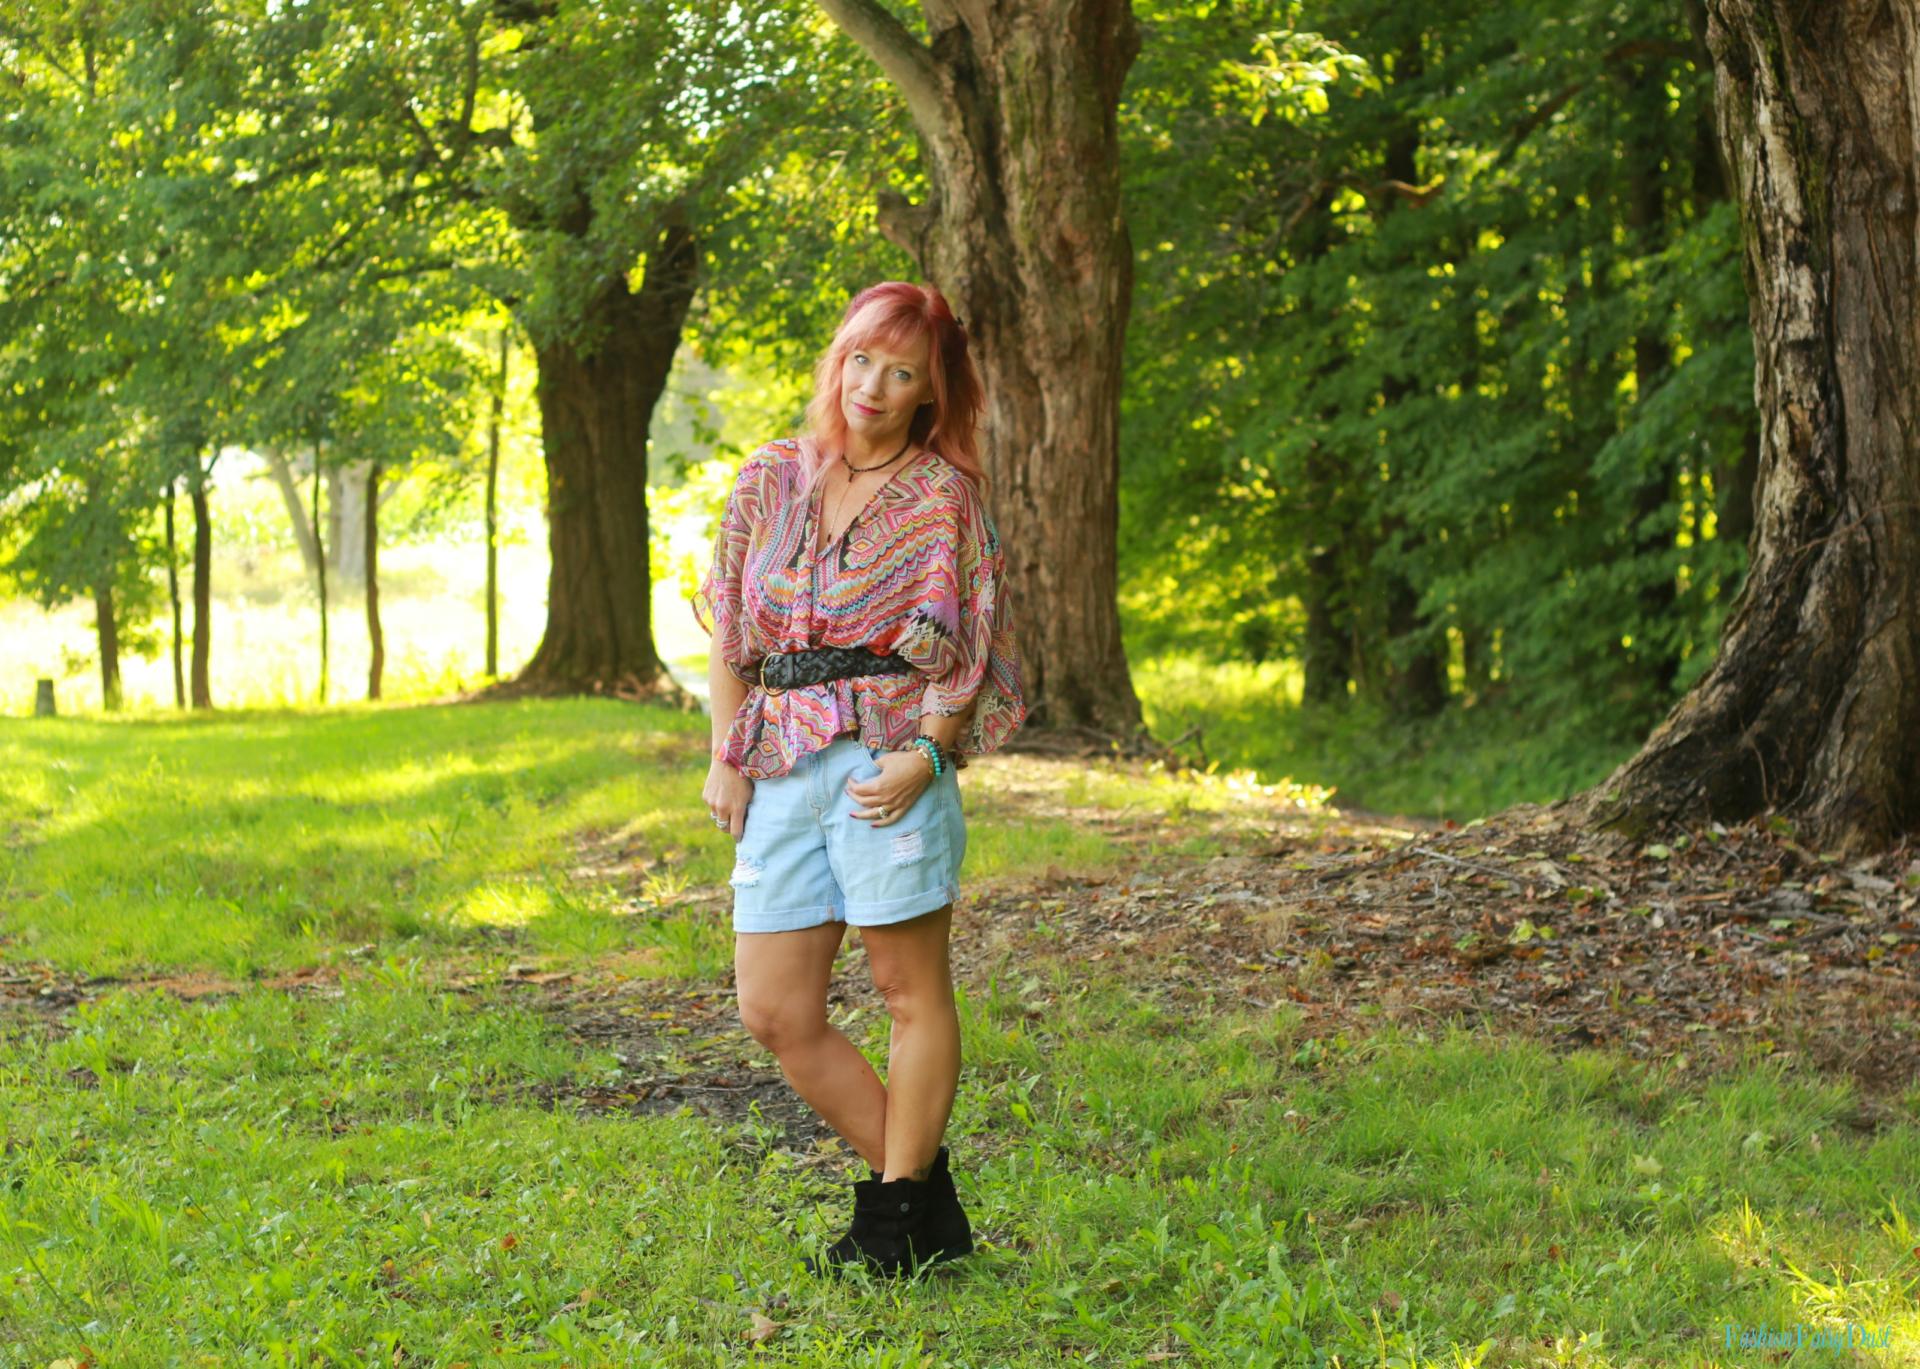 Kimono as a top, black ankle boots and denim shorts.